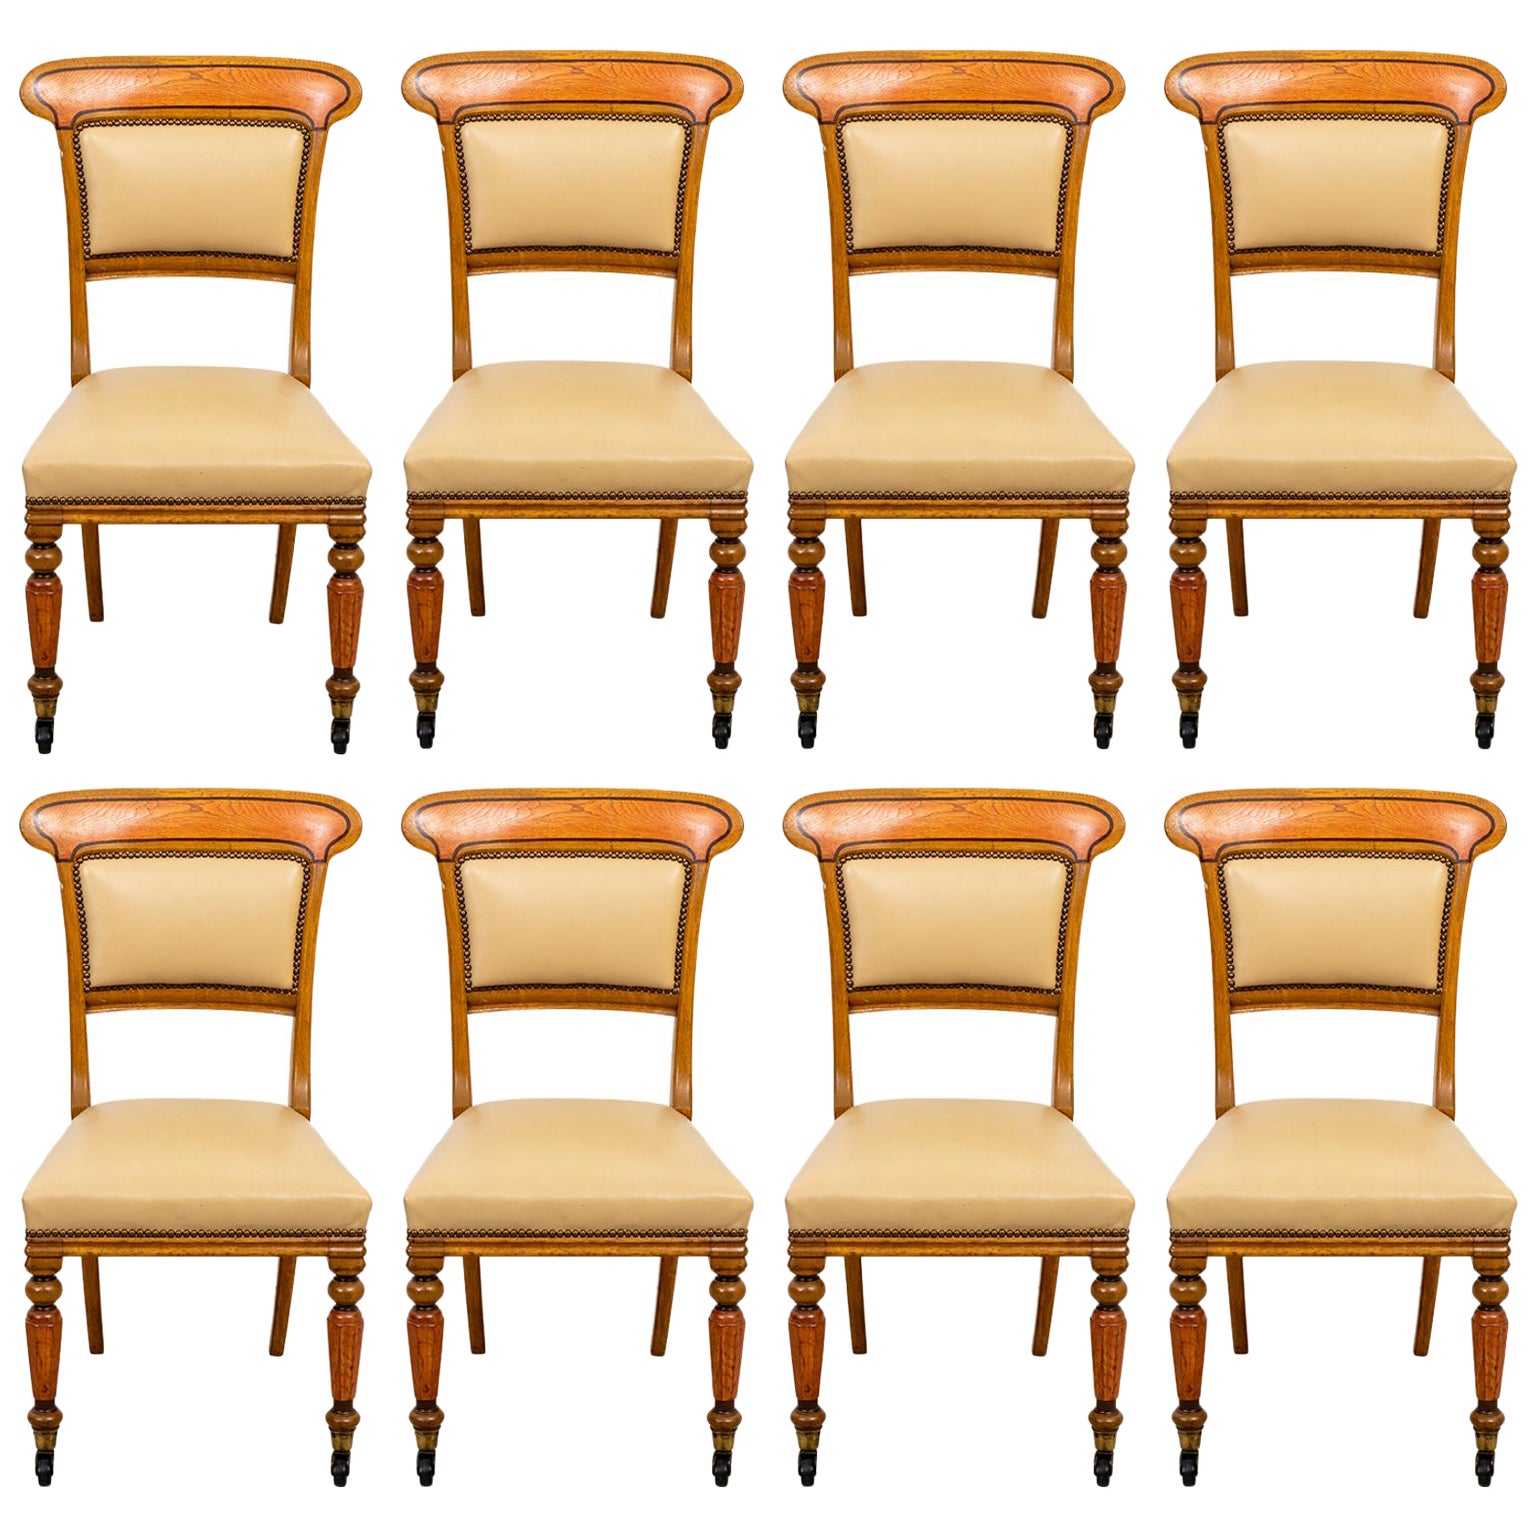 Set of Eight Dining Chairs in Leather with Nailhead Trim from John Rosselli